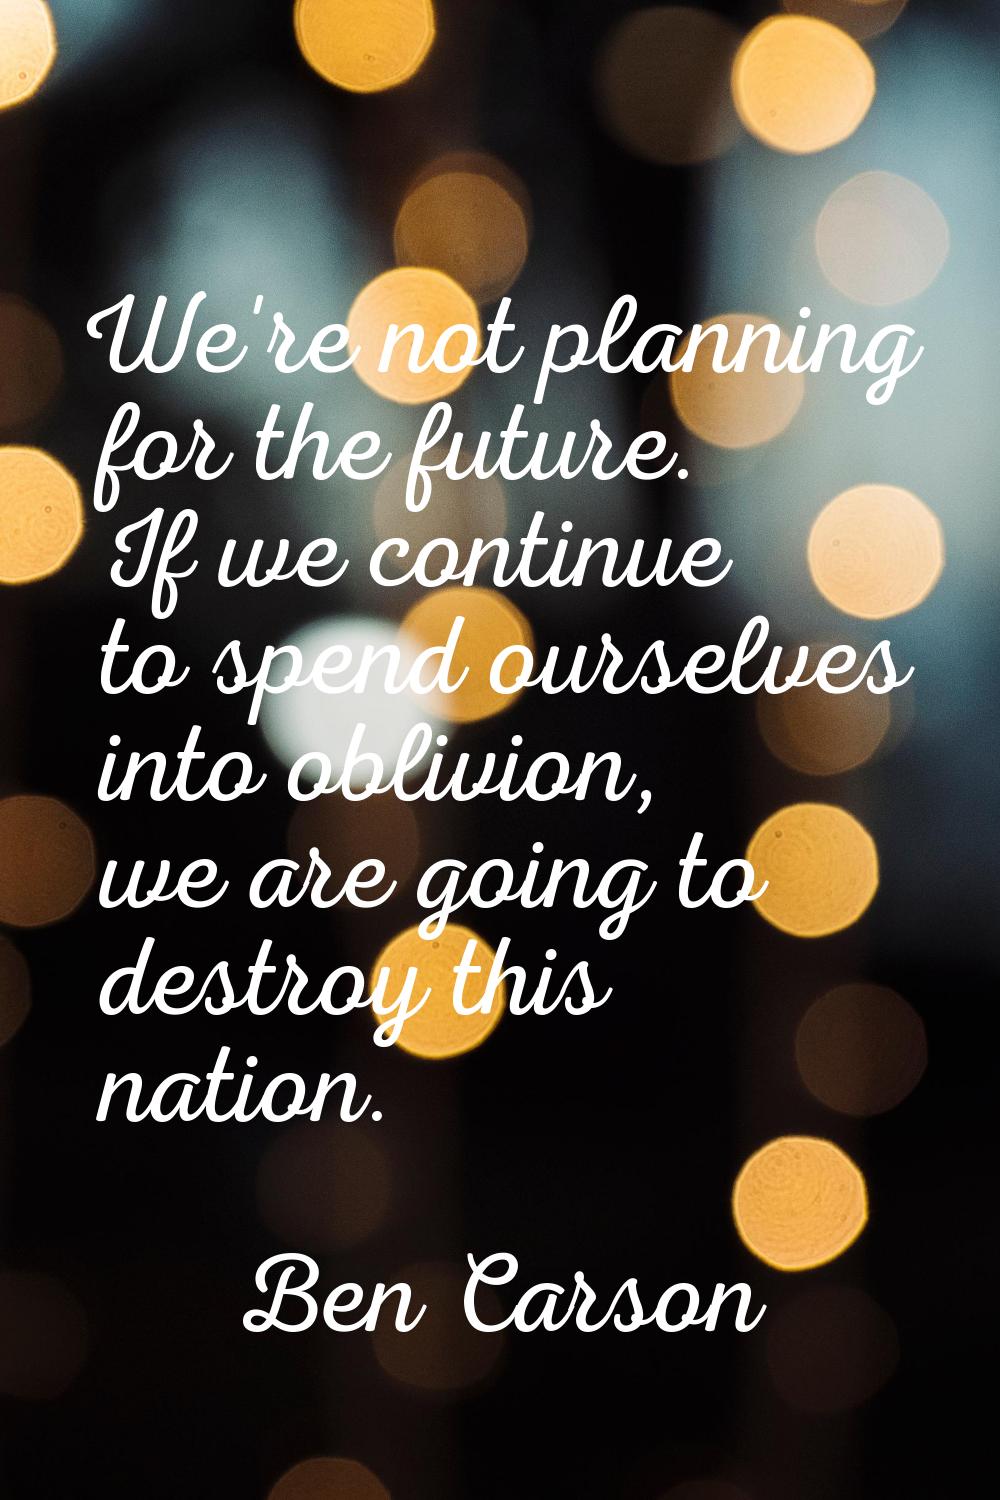 We're not planning for the future. If we continue to spend ourselves into oblivion, we are going to